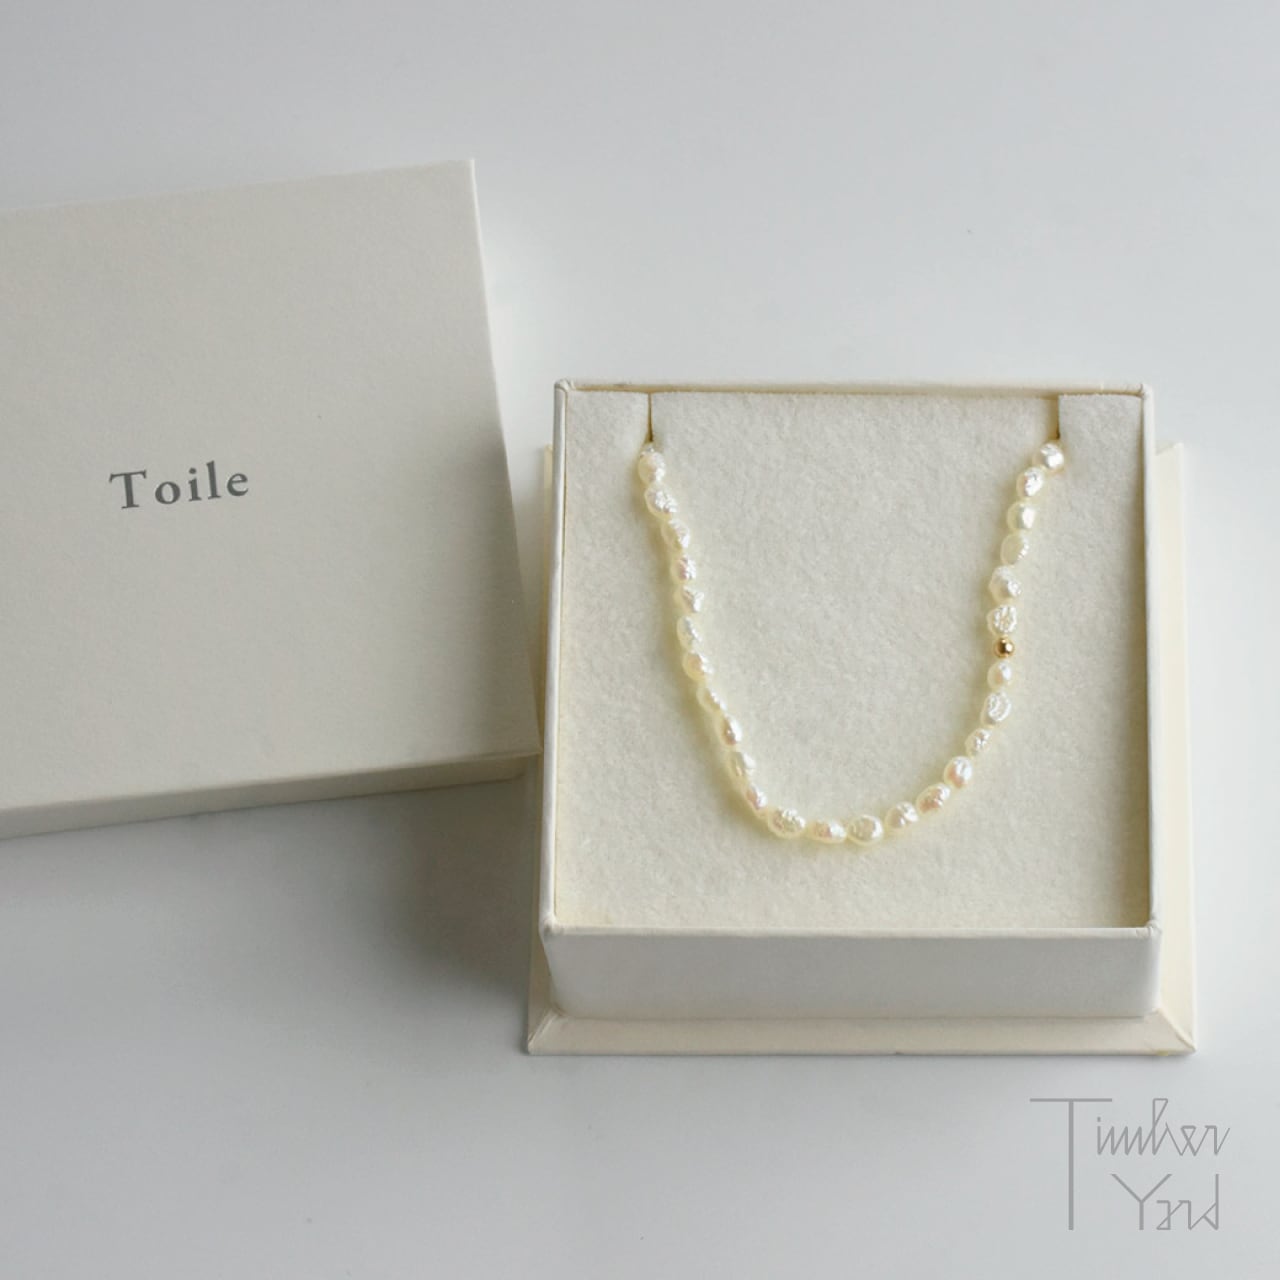 Necklace｜Rice Pearl Necklace | TIMBER YARD powered by BASE